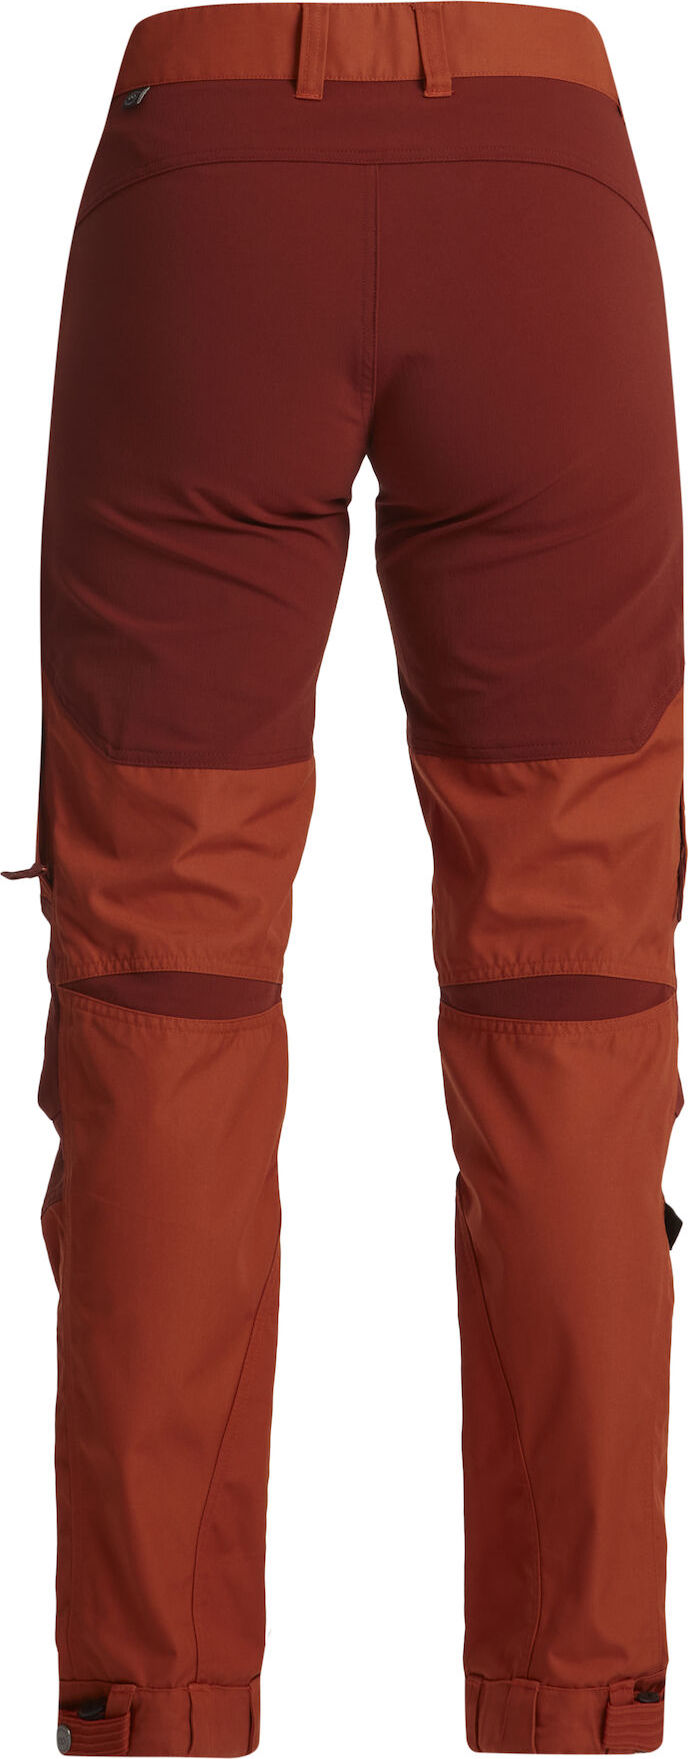 Lundhags Authentic Pant Review - Outdoorguru